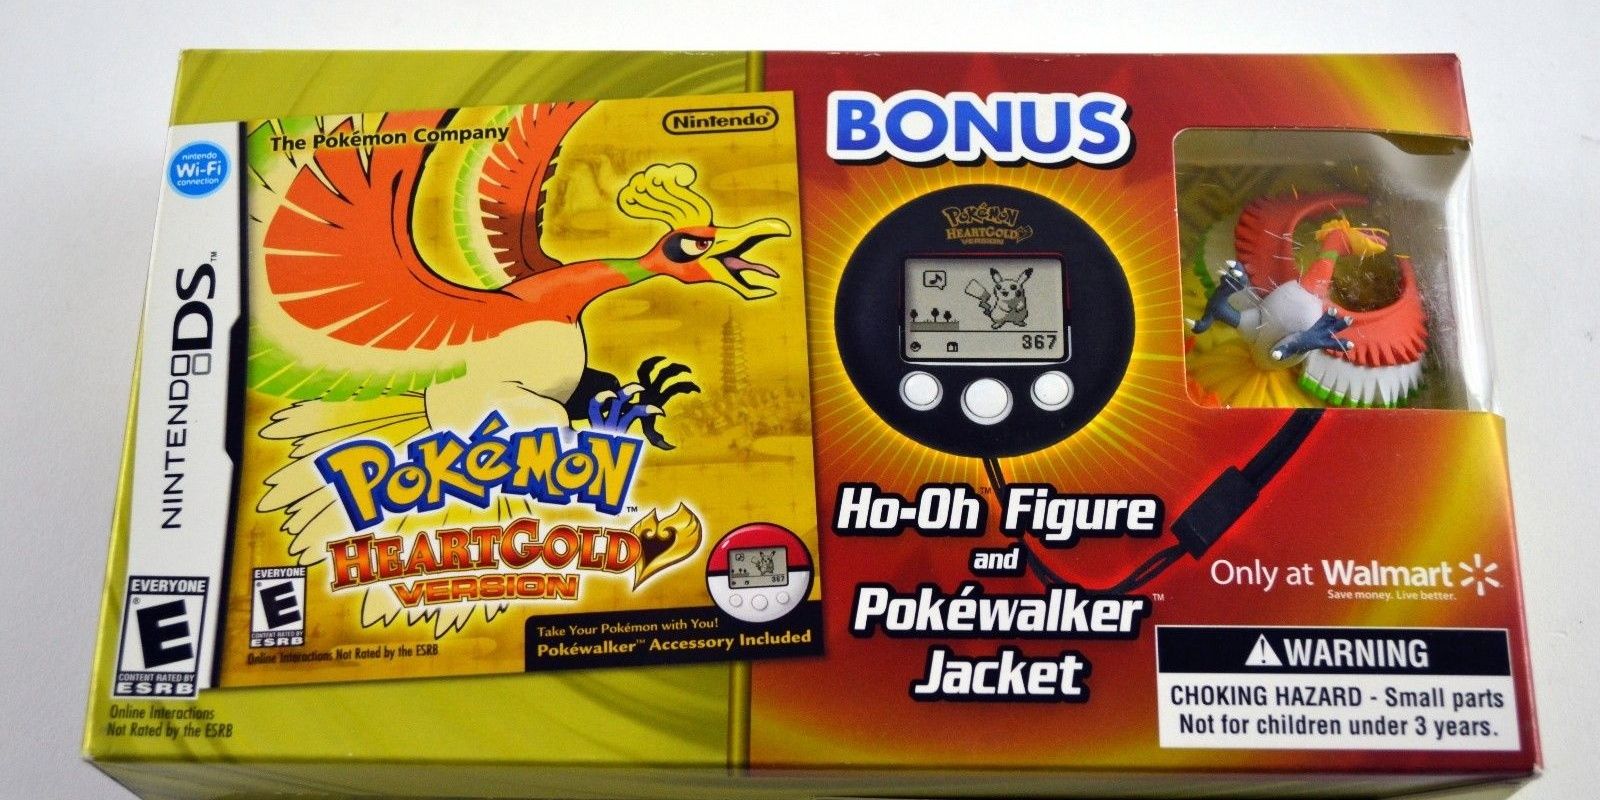 A Pokemon Heartgold Special Edition Bundle With Ho-Oh Figure